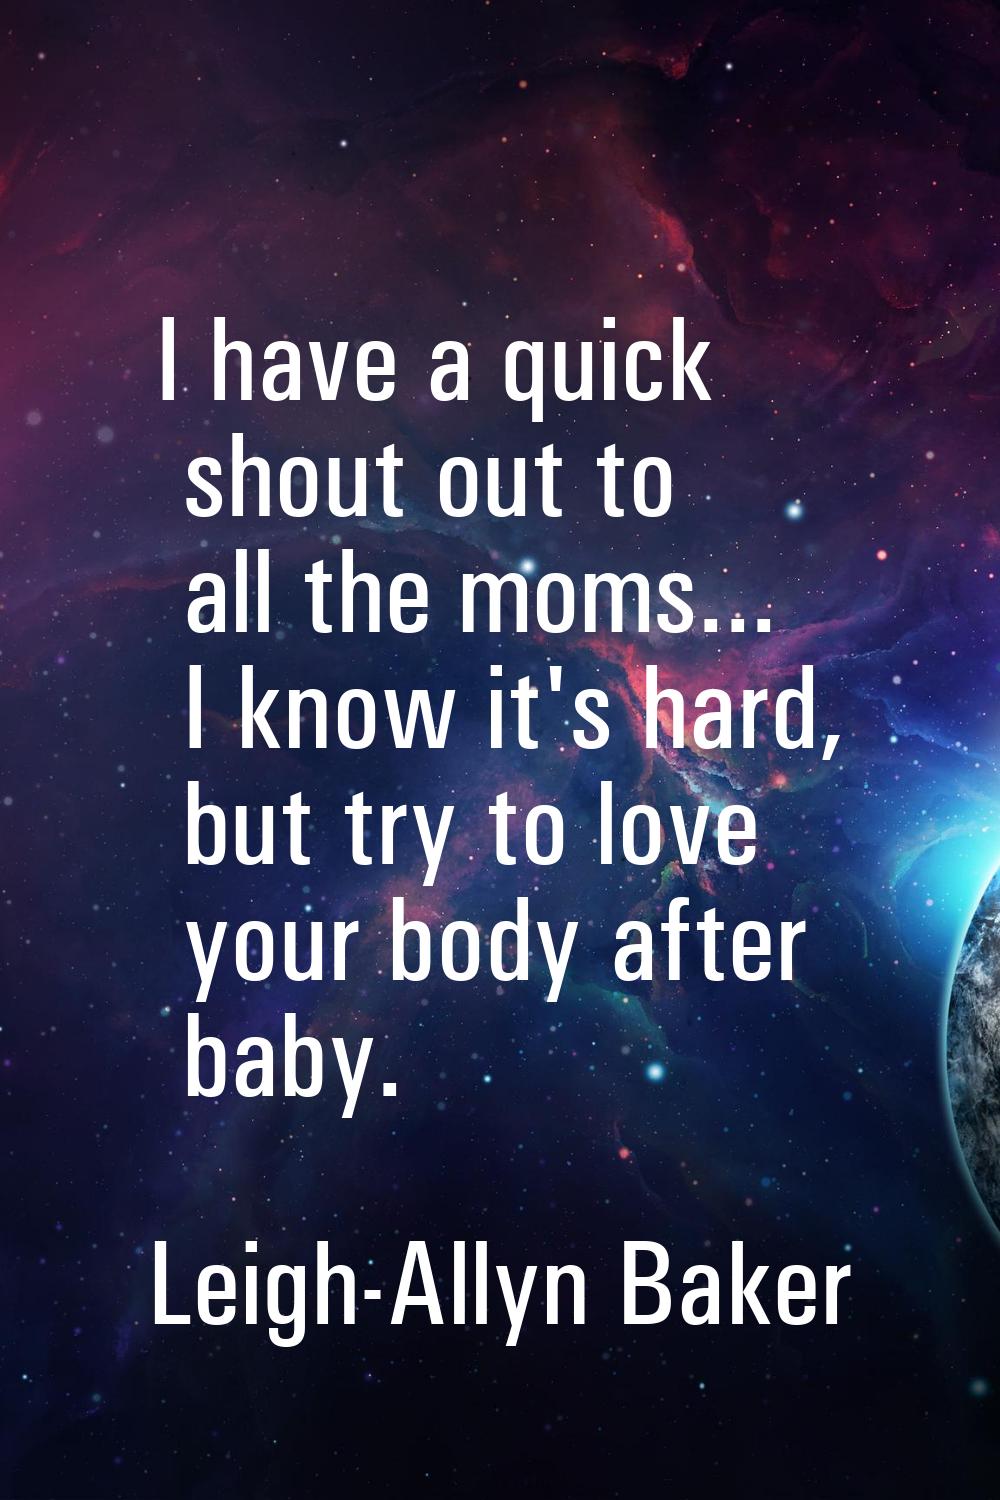 I have a quick shout out to all the moms... I know it's hard, but try to love your body after baby.